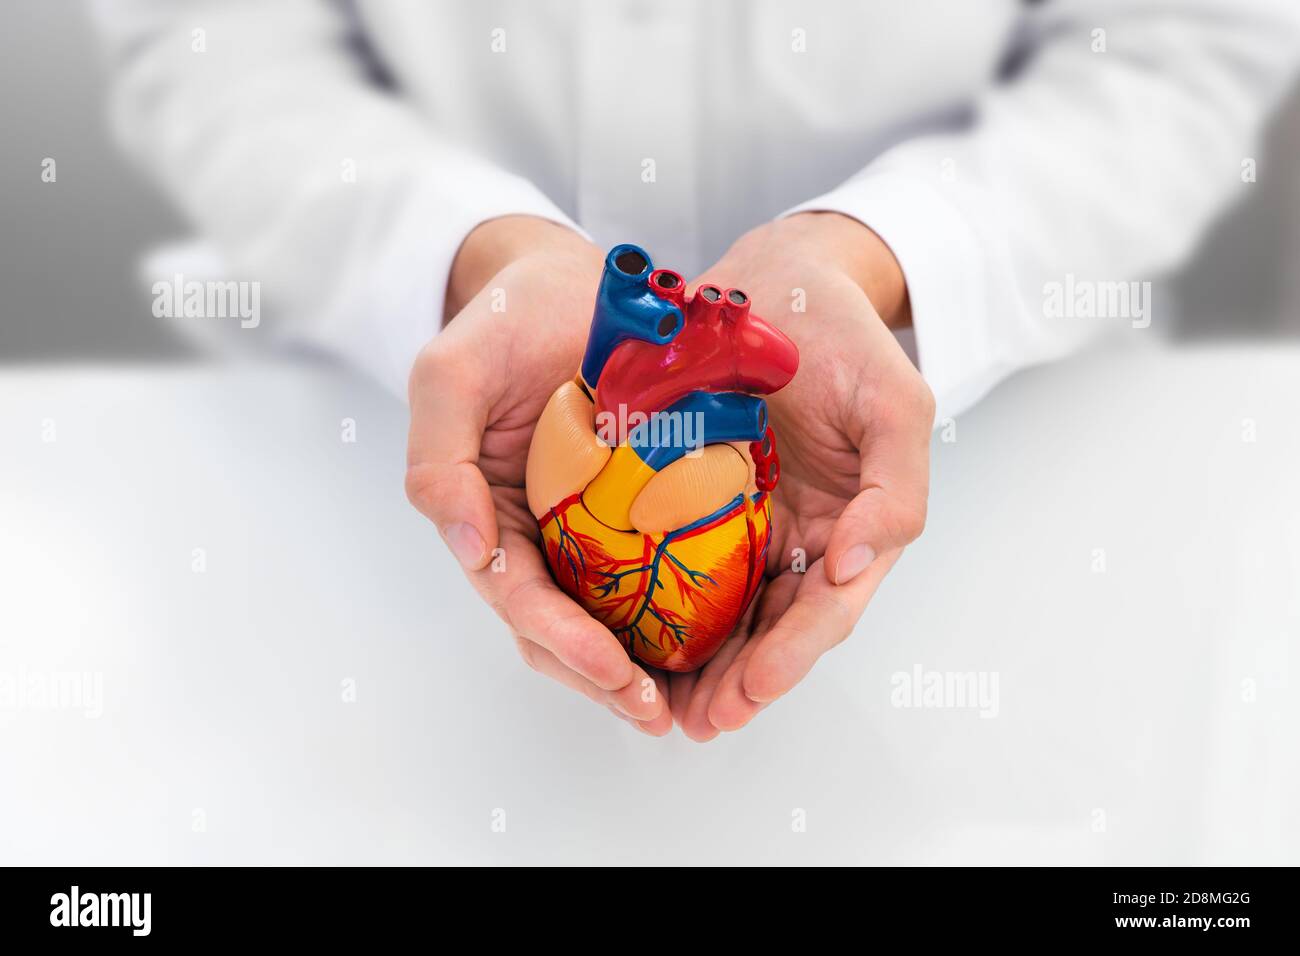 doctor showing support for heart and cardiac health. Anatomical model of the heart in hands of cardiologist. Heart attacks and medical treatment Stock Photo